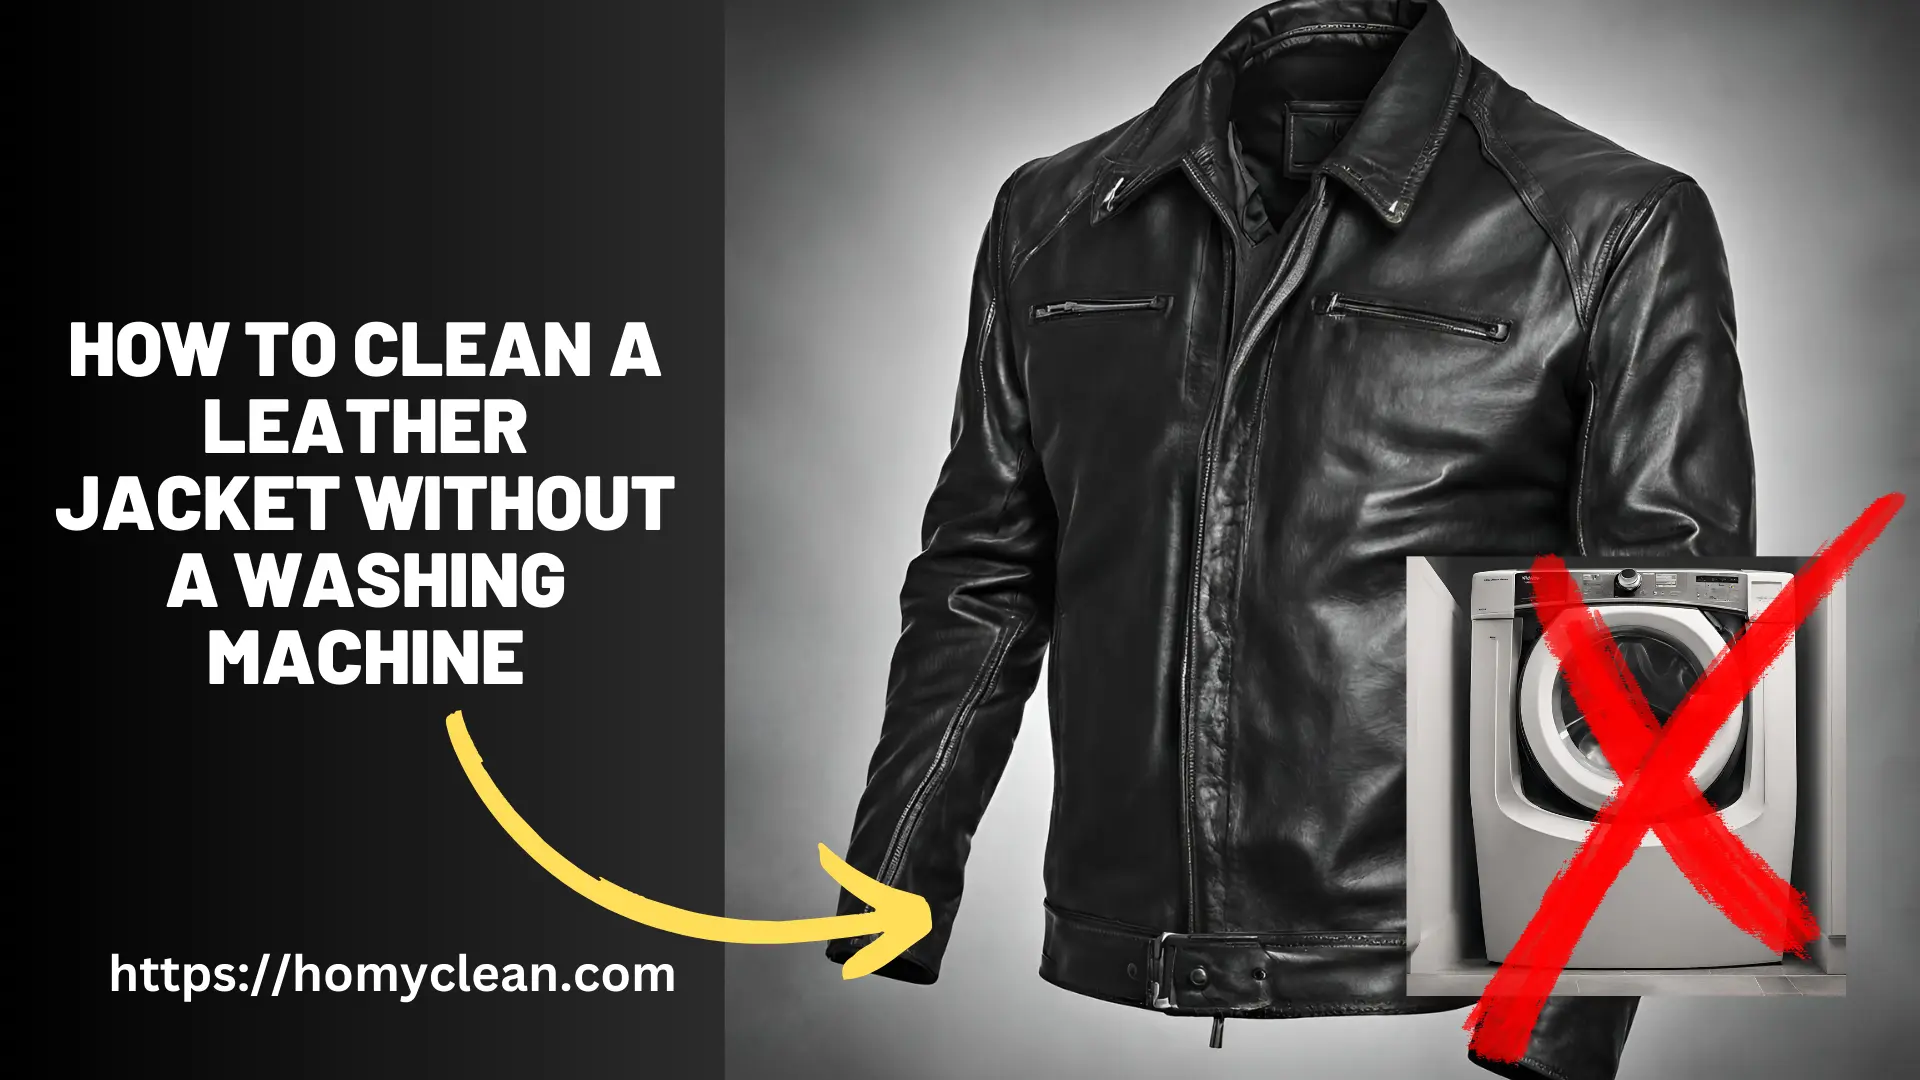 How to Clean a Leather Jacket Without a Washing Machine